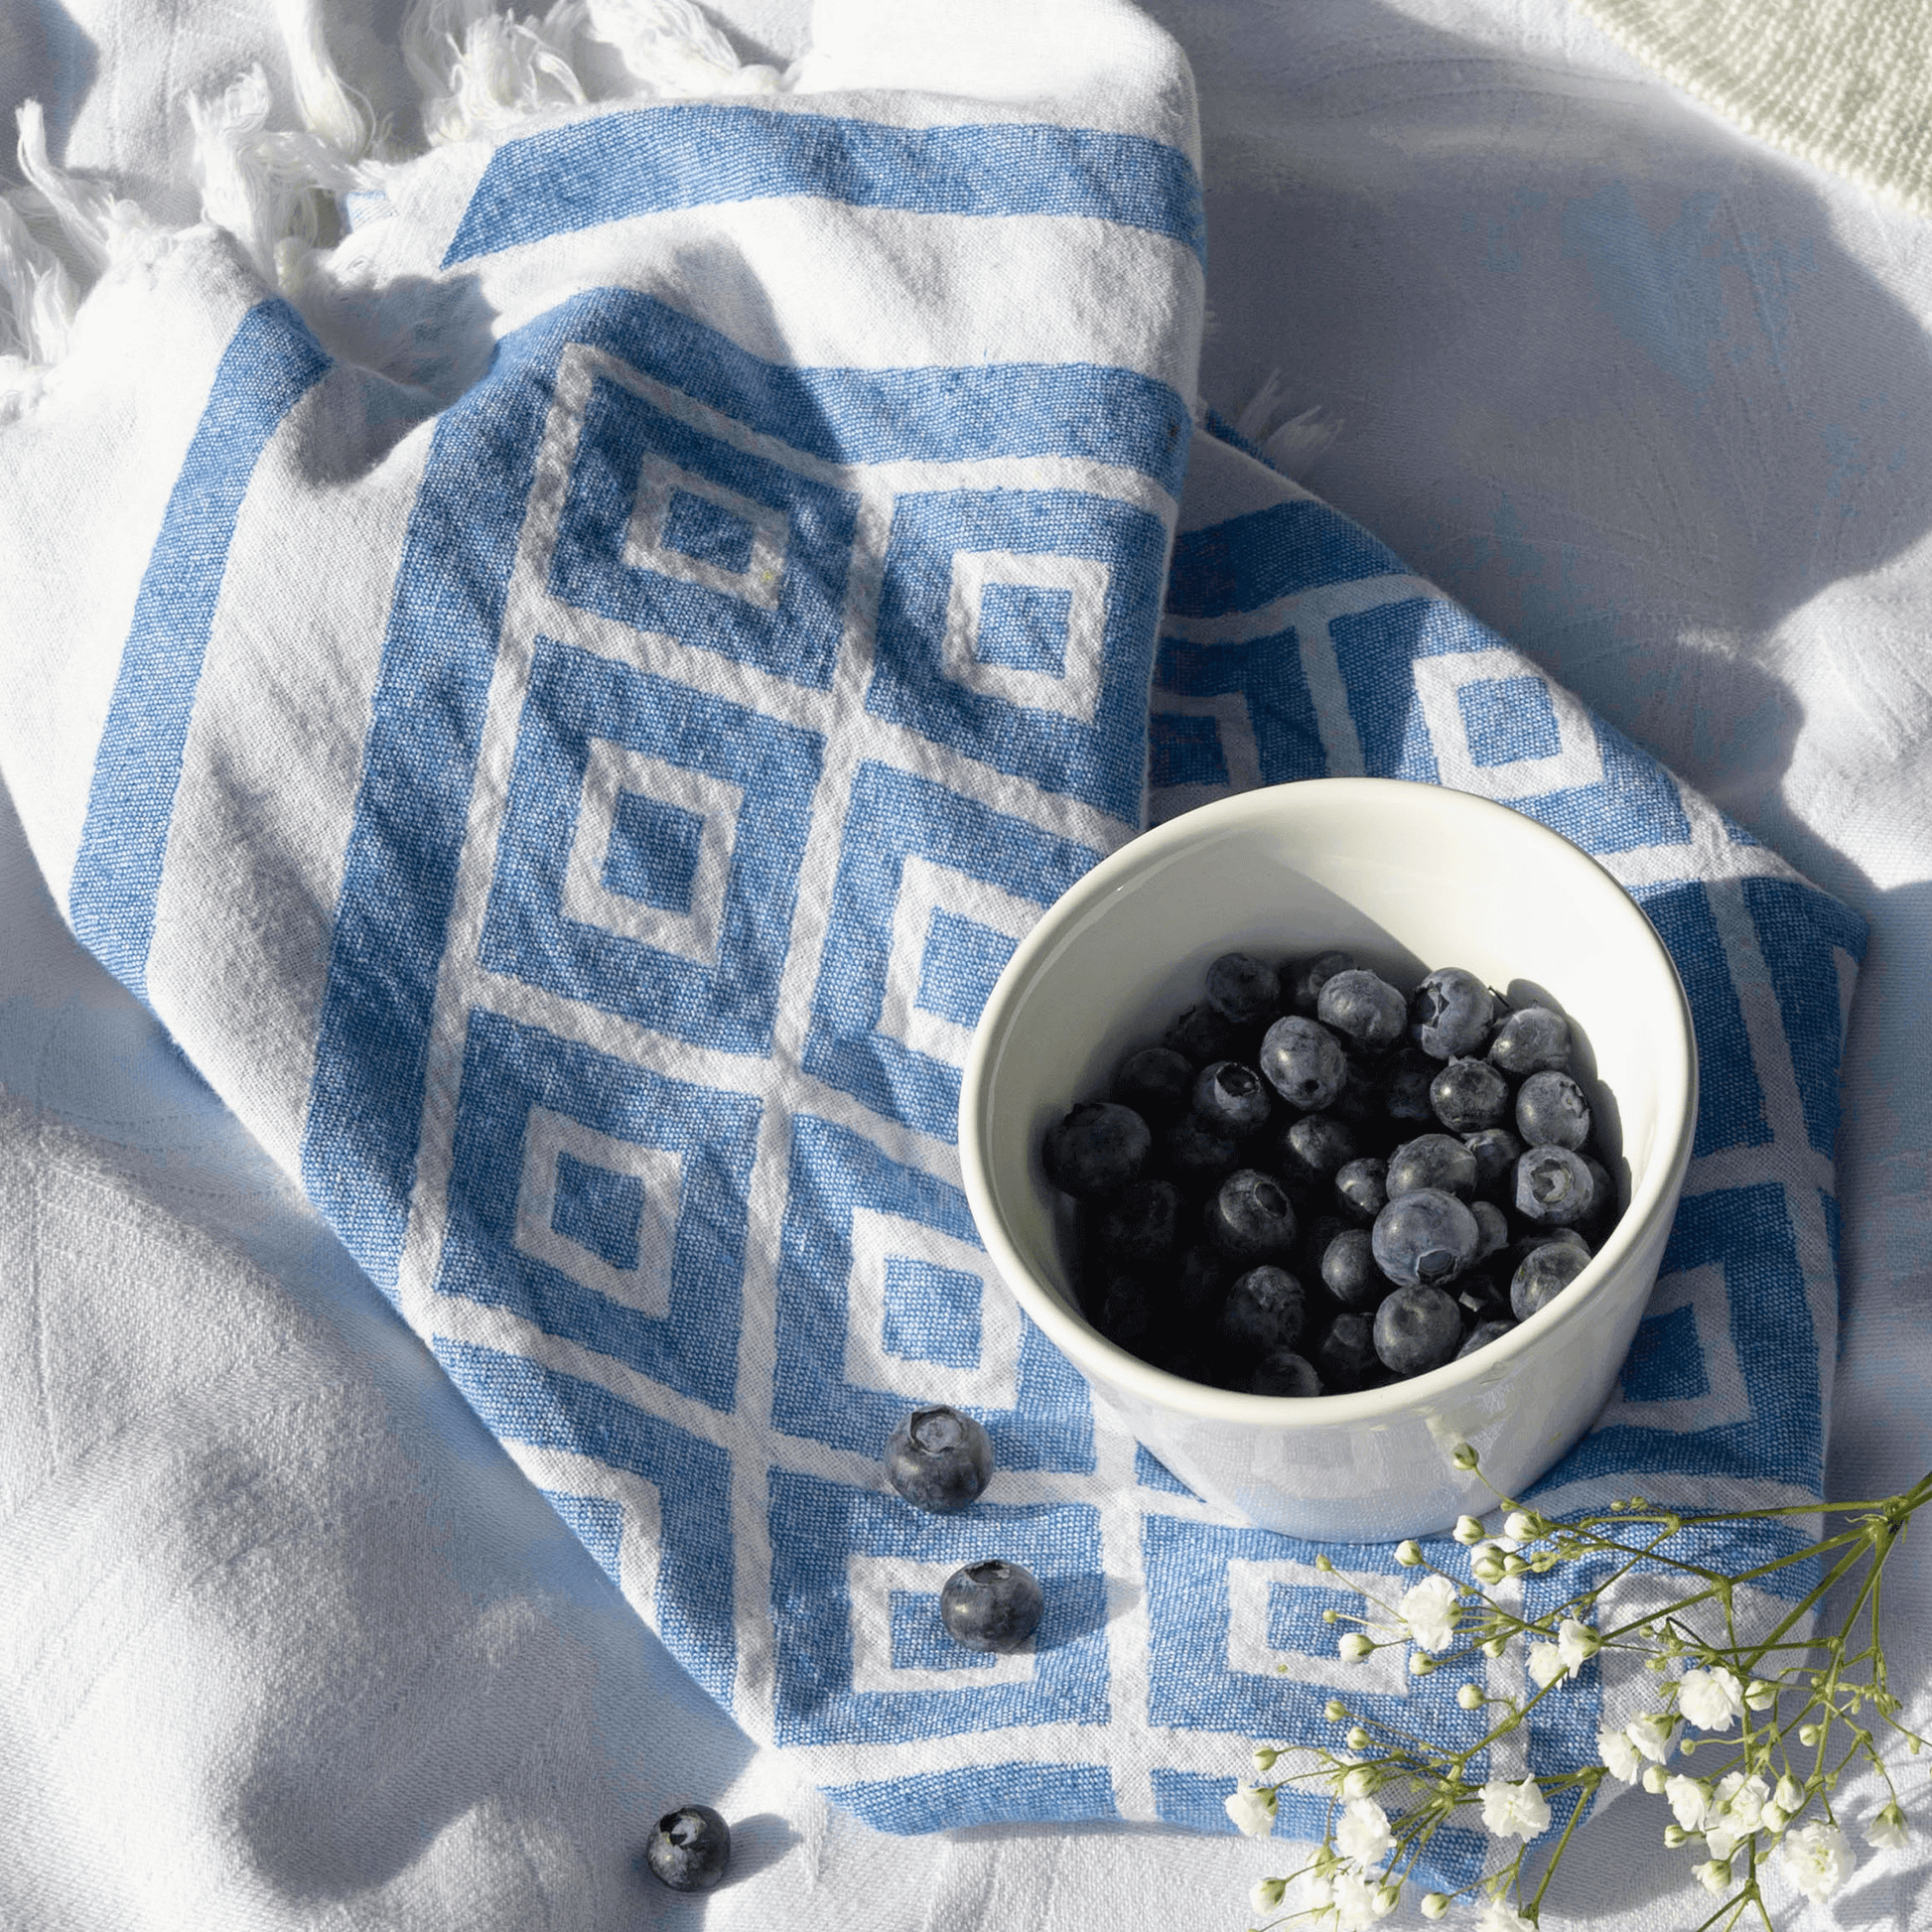 White and blue Turkish towel with blueberries